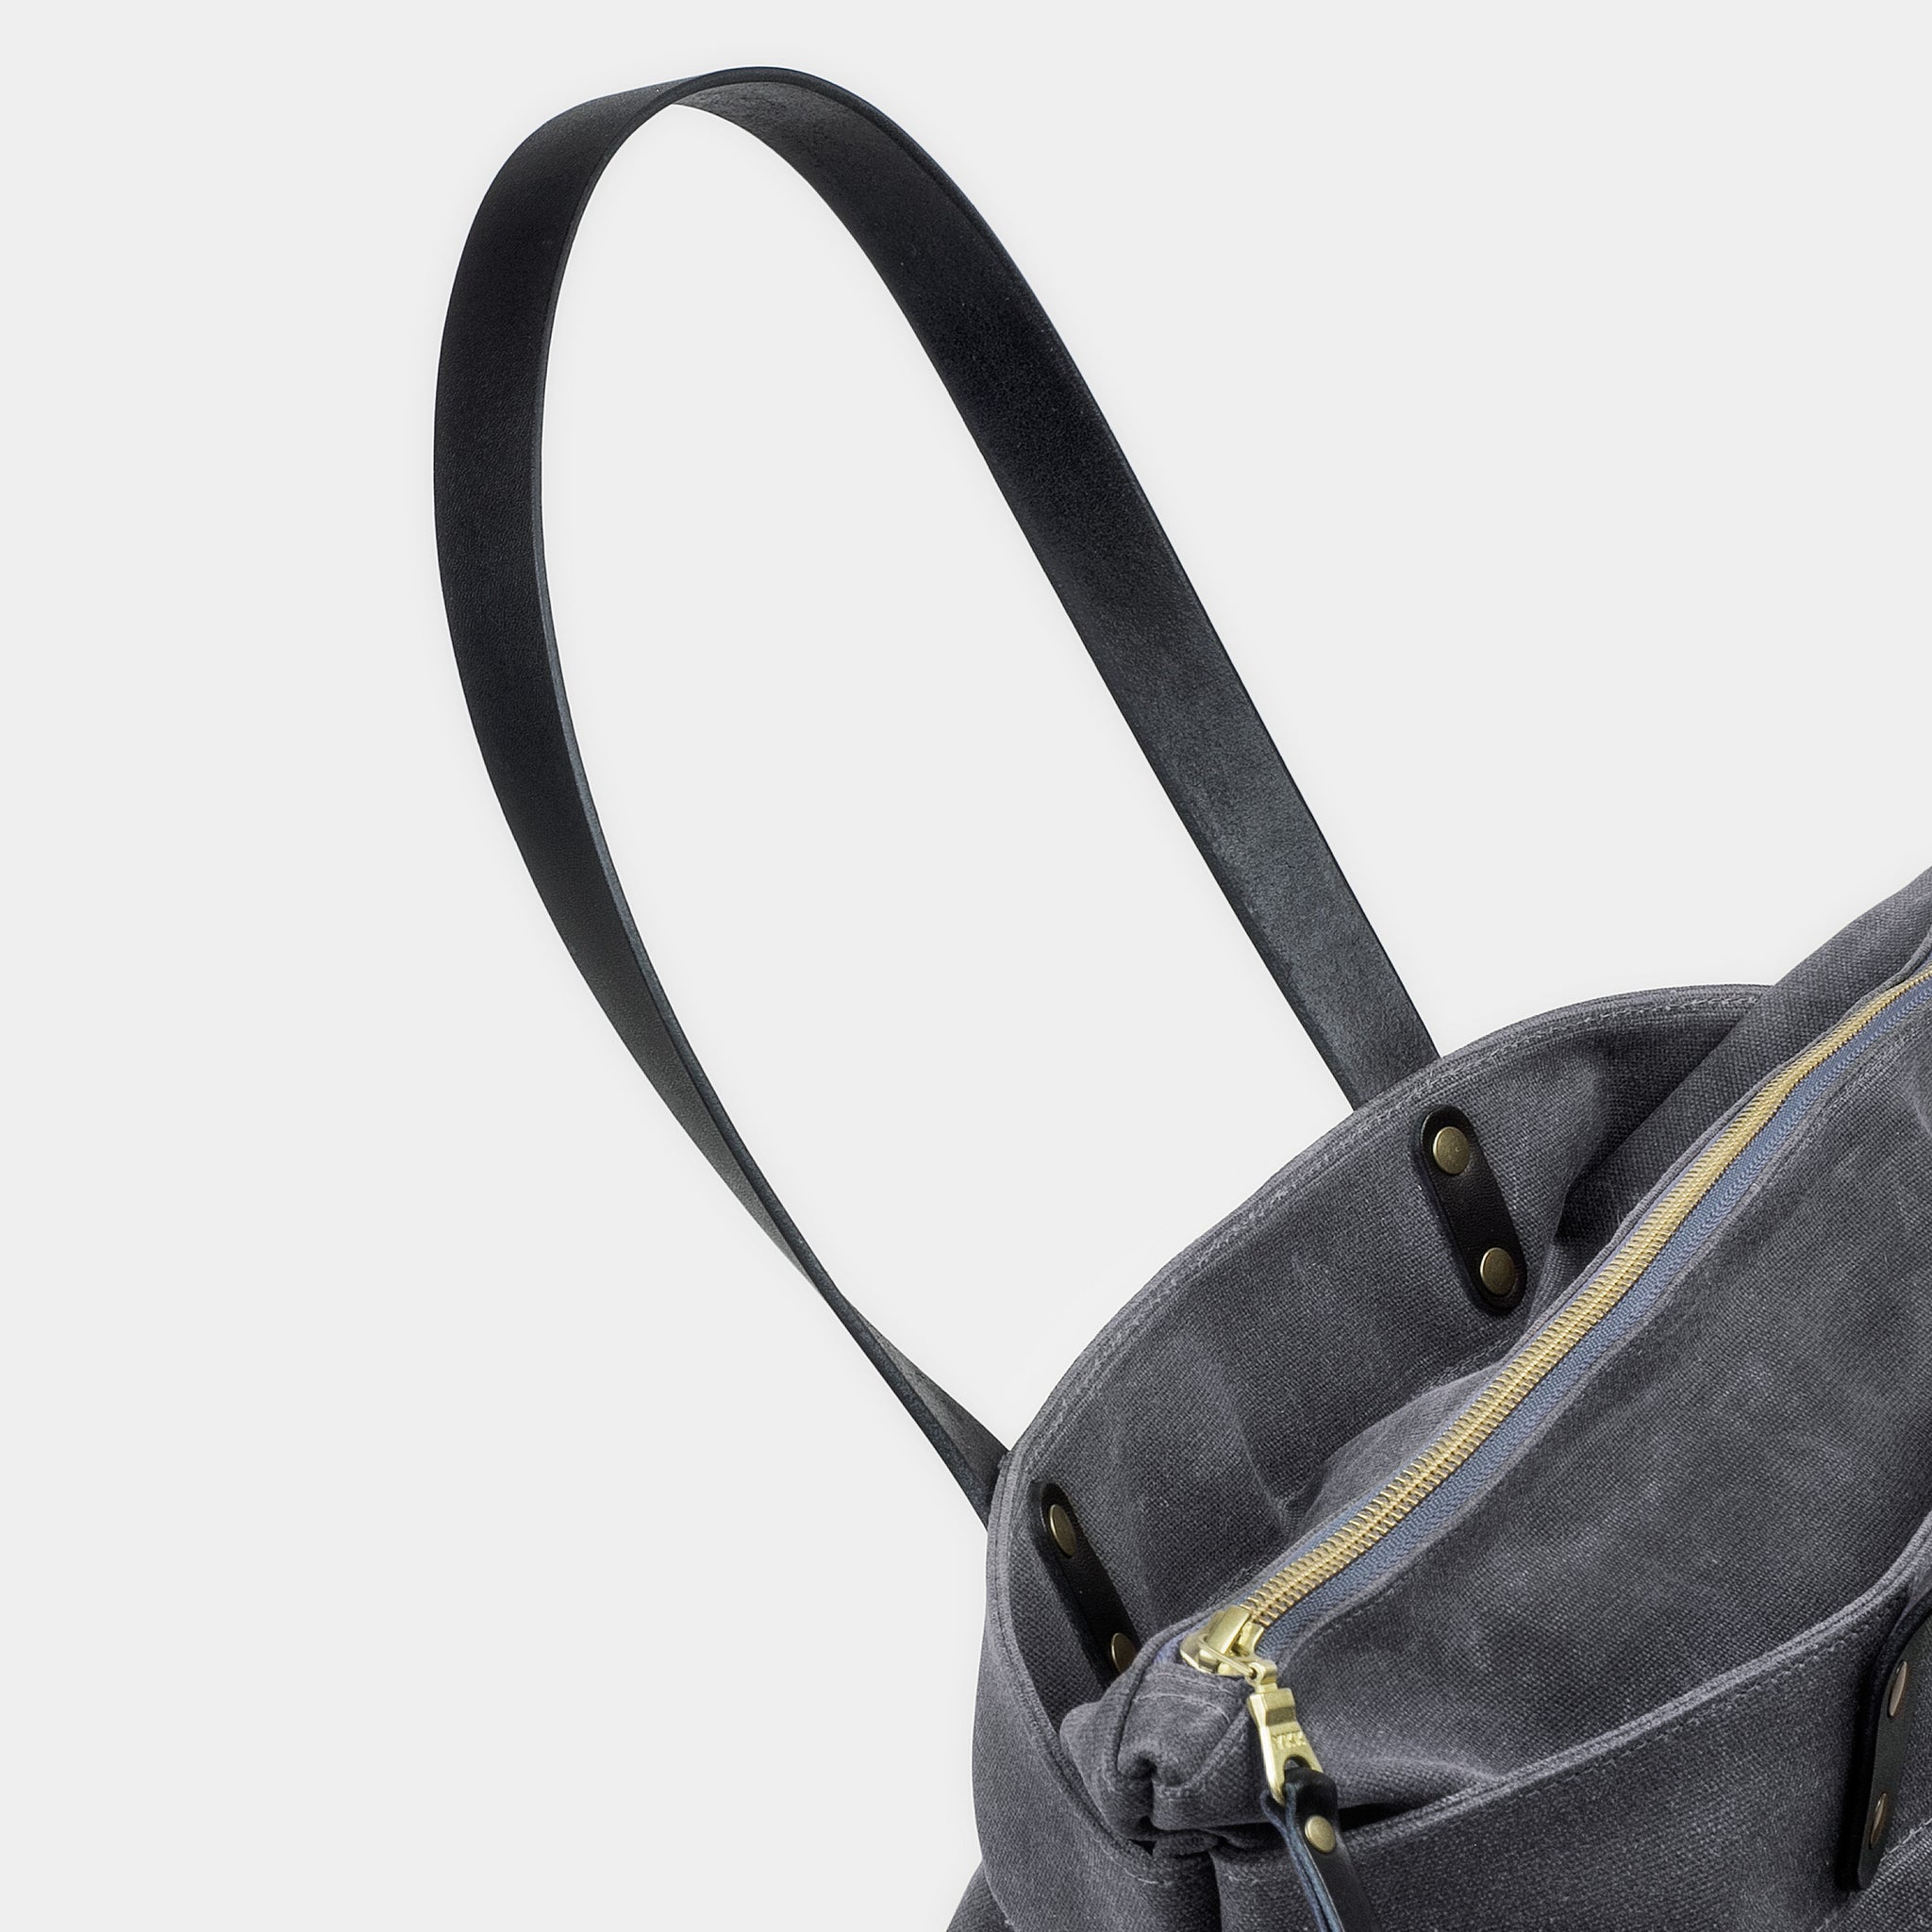 Waxed Canvas Zipper Tote Bag – Winter Session